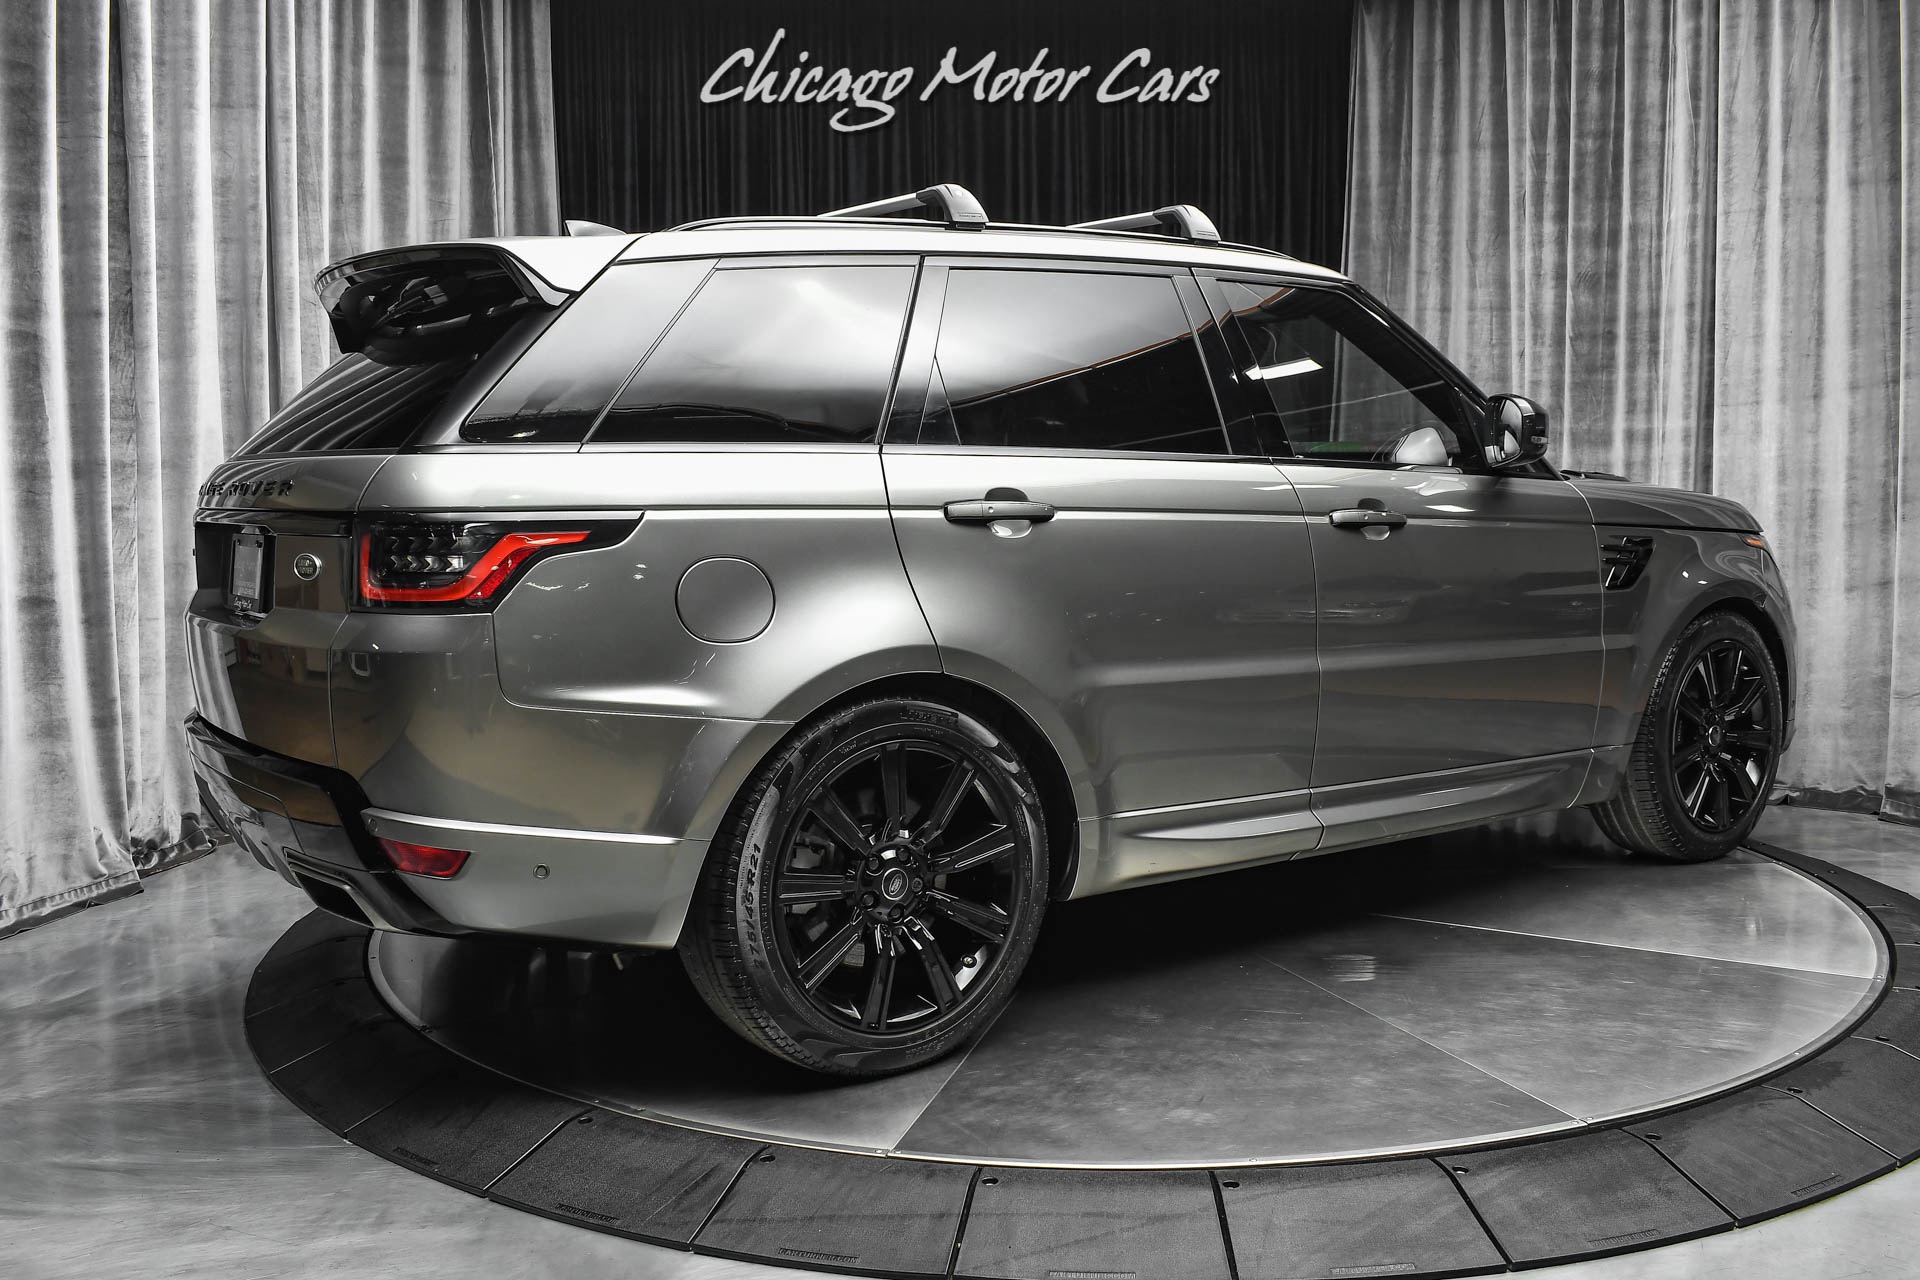 Used-2018-Land-Rover-Range-Rover-Sport-HSE-Dynamic-87kMSRP-Panoramic-Roof-Soft-Close-Doors-Gorgeous